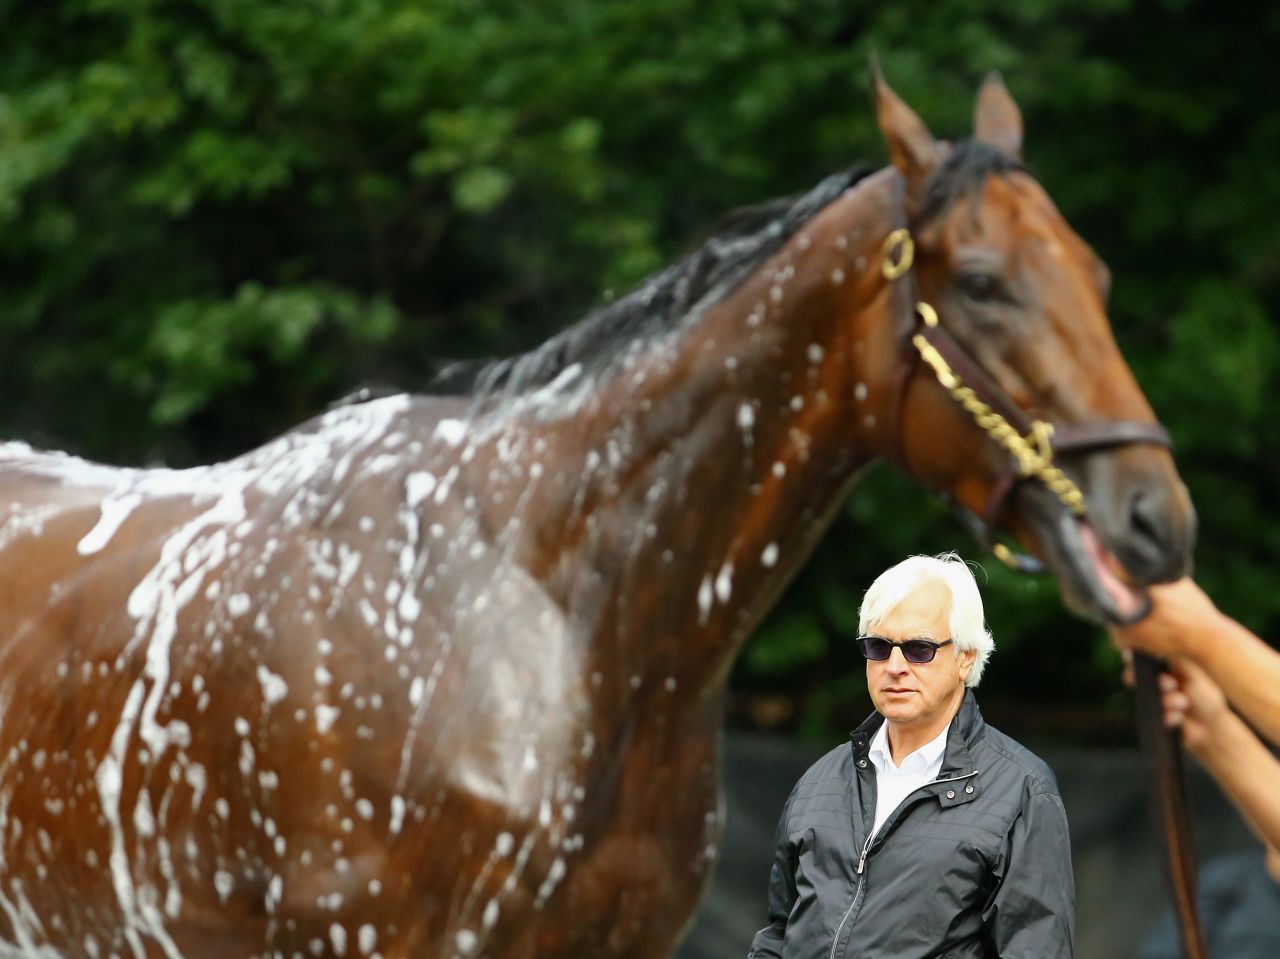 Bob Baffert has trained three previous winners of the Kentucky Derby, but American Pharoah broke new ground for him. "I've been fortune to have some really good horses -- he just kept on, he'd bring it every time," Baffert told CNN. 